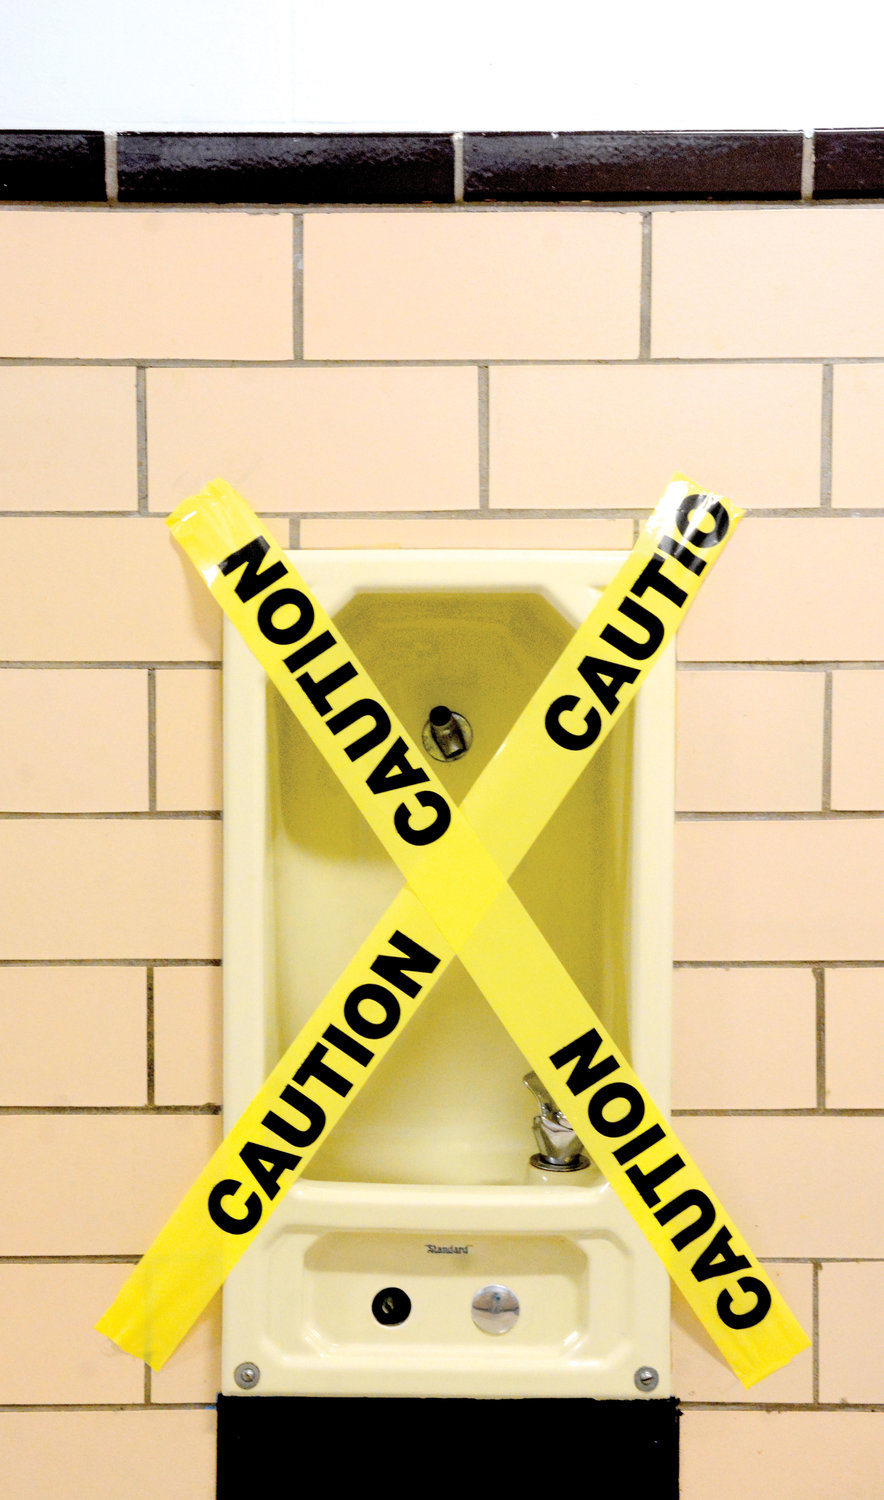 Tape crisscrossing a water fountain indicates it will be out of commission out of an abundance of caution.